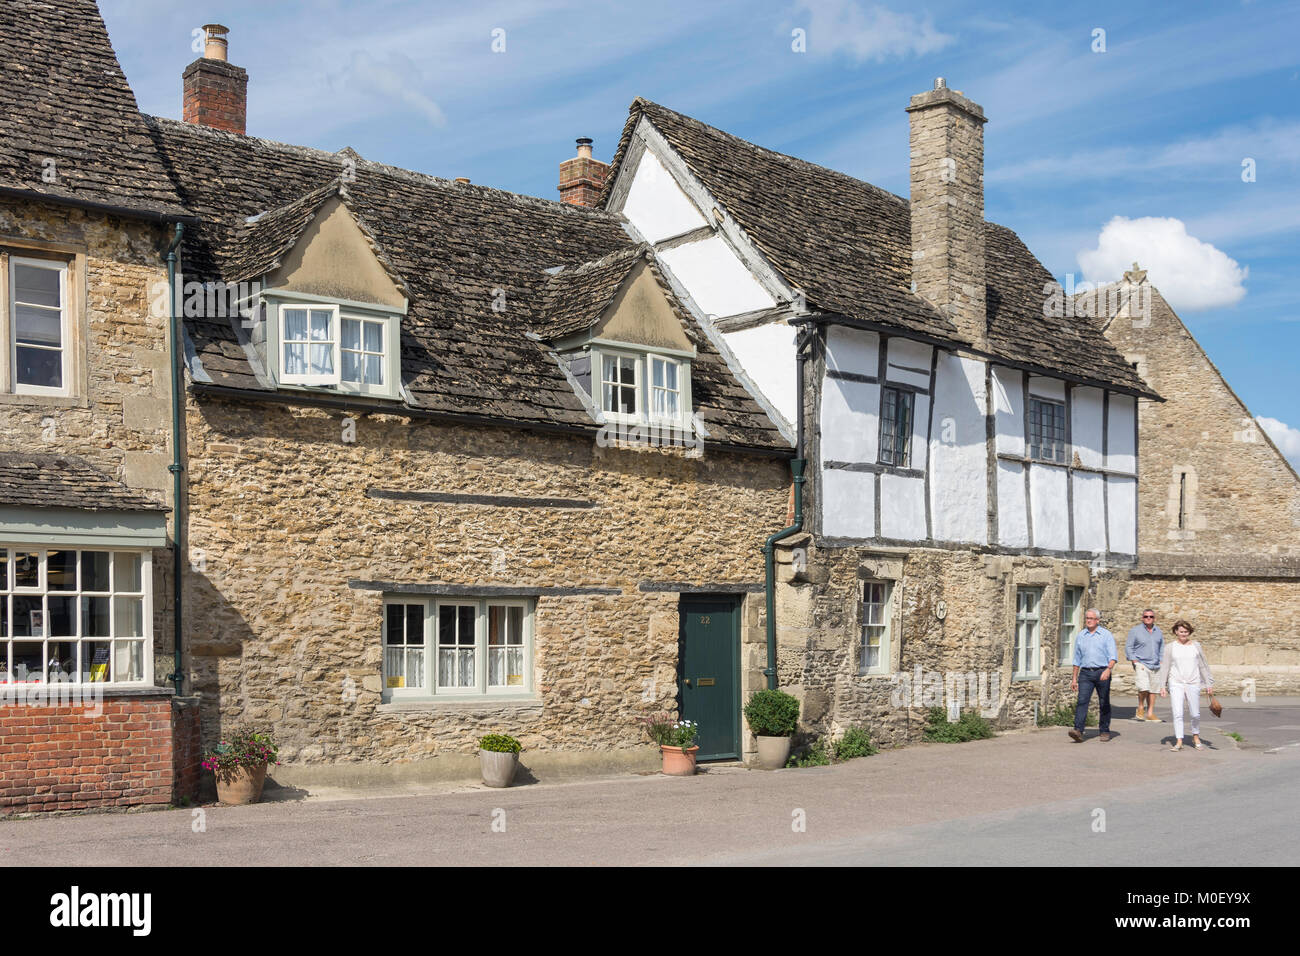 Period buildings, High Street, Lacock, Wiltshire, England, United Kingdom Stock Photo